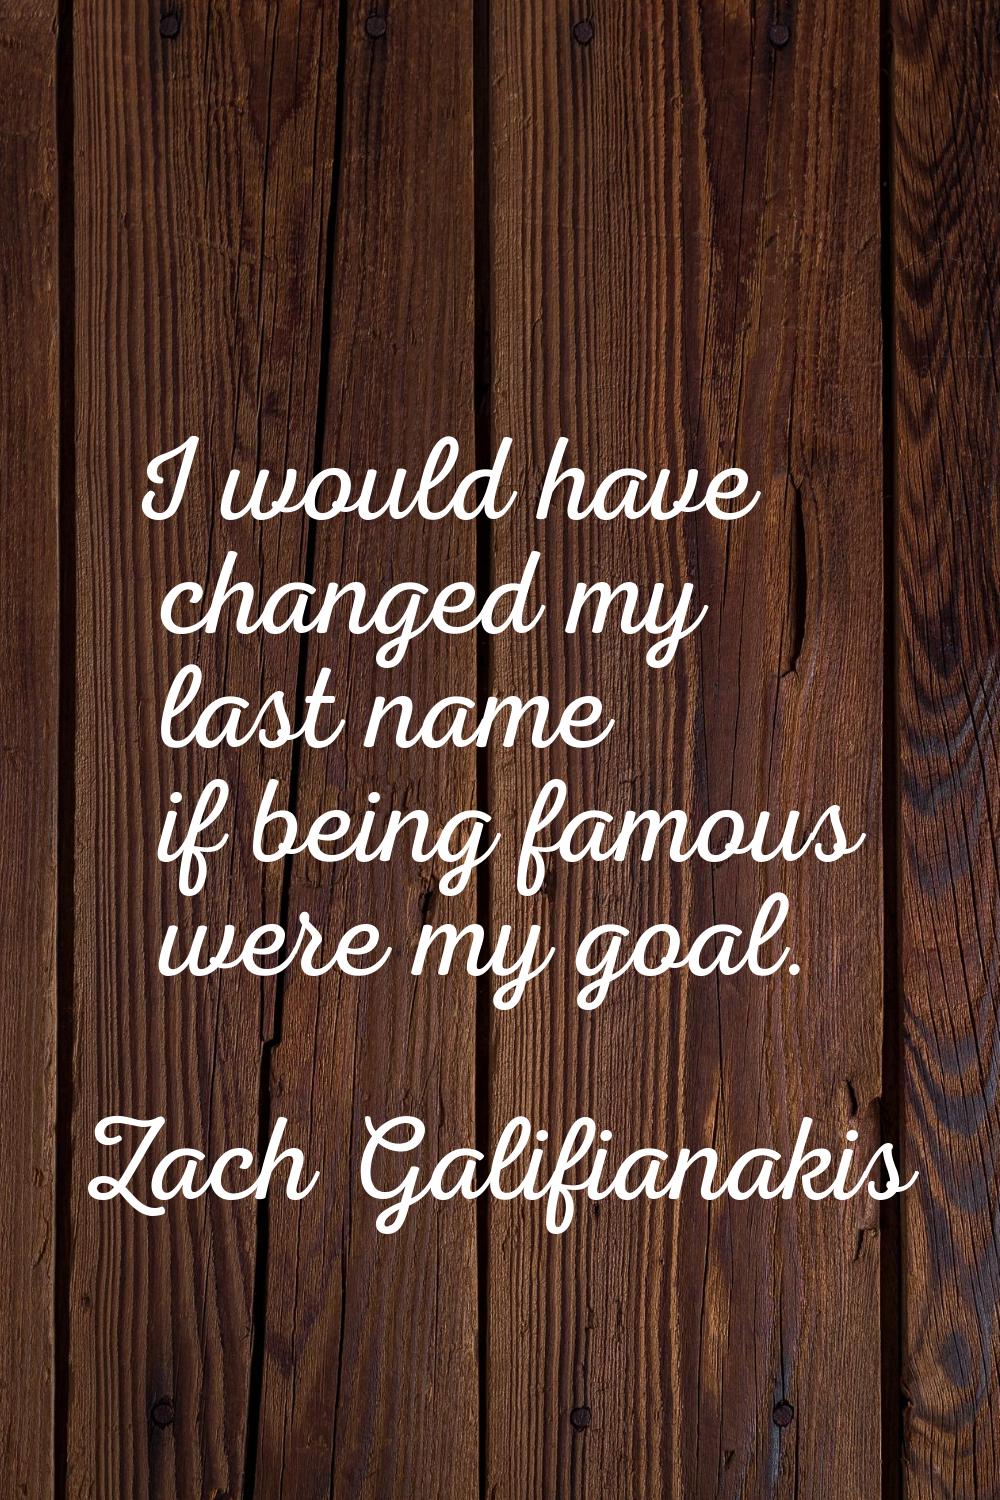 I would have changed my last name if being famous were my goal.